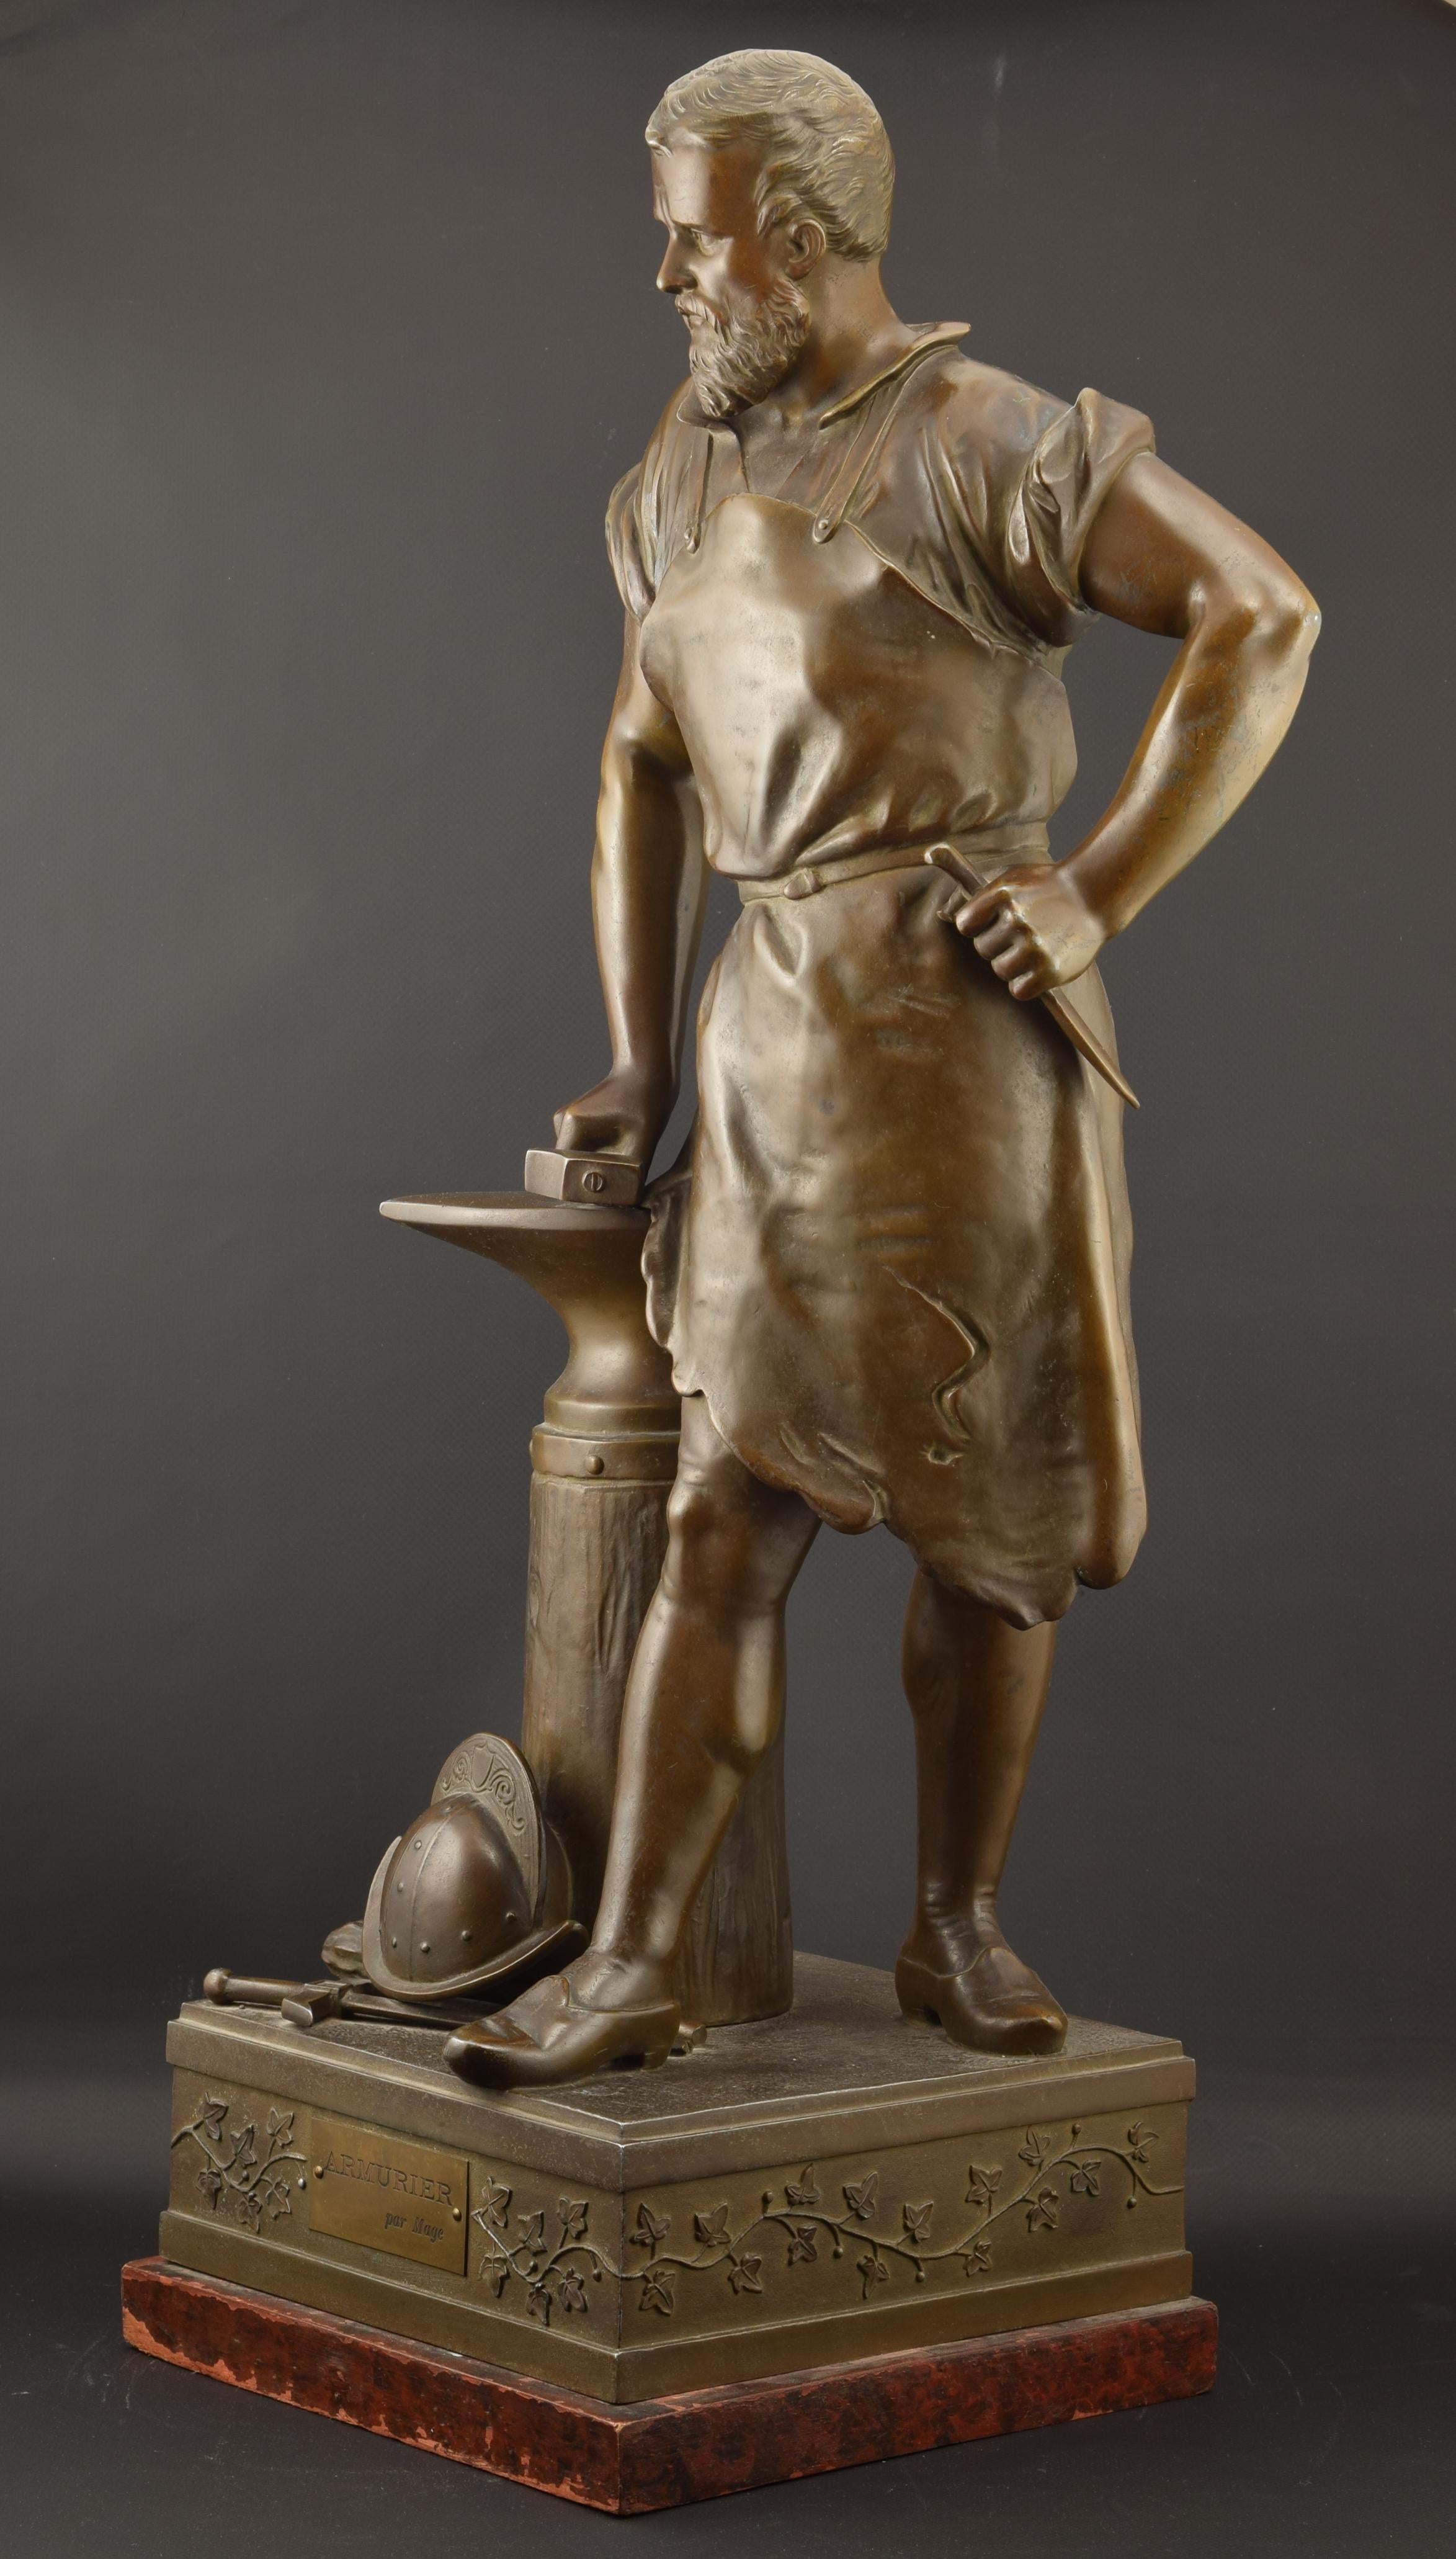 The masculine figure, of forceful posture and musculature without exaggerations, is holding the tools of his craft next to an anvil, at whose feet appear an old helmet and sword. On the small pedestal decorated with plant elements there is a metal